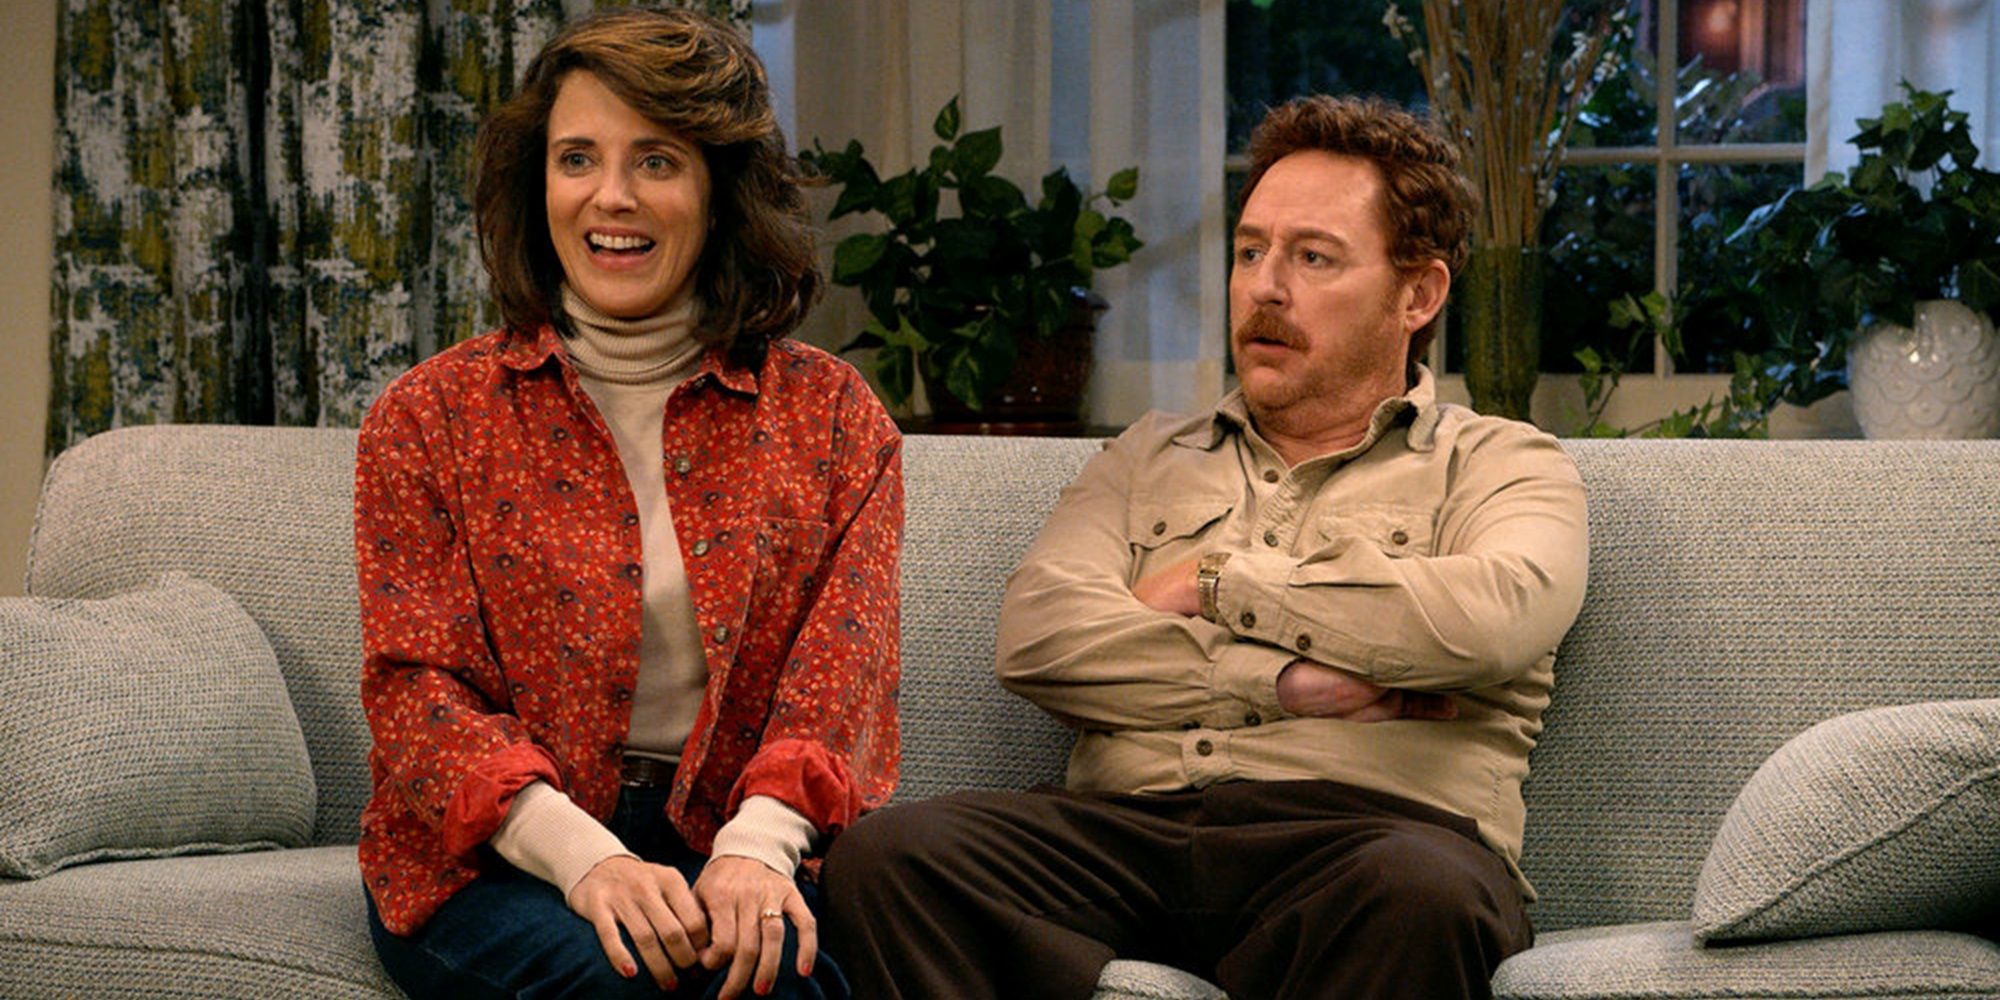 Matty and Susan on the couch in Ted